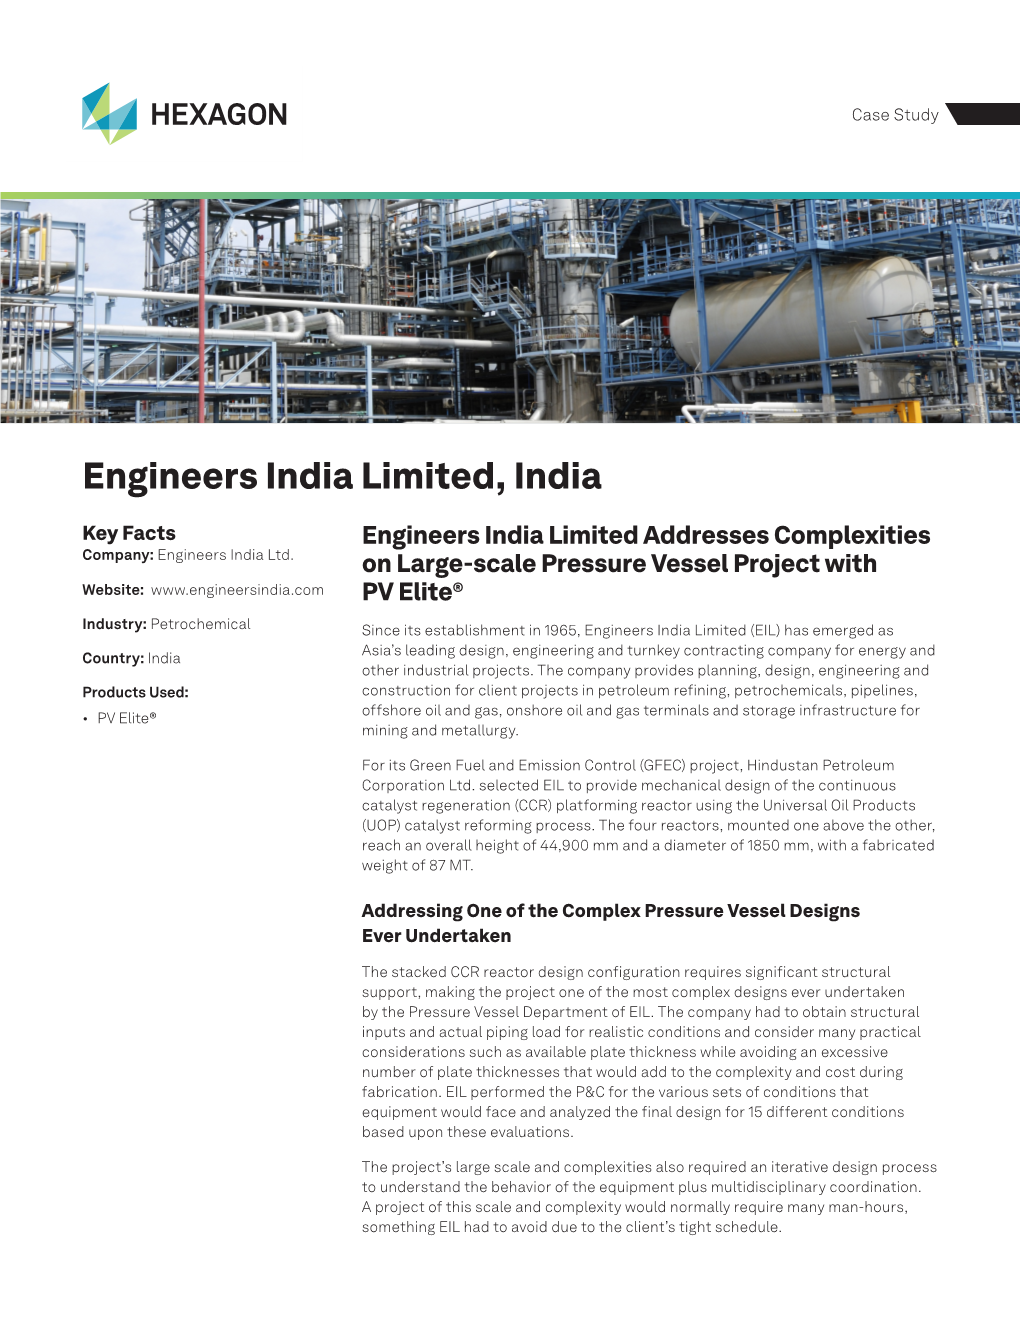 Engineers India Ltd. on Large-Scale Pressure Vessel Project with Website: PV Elite®